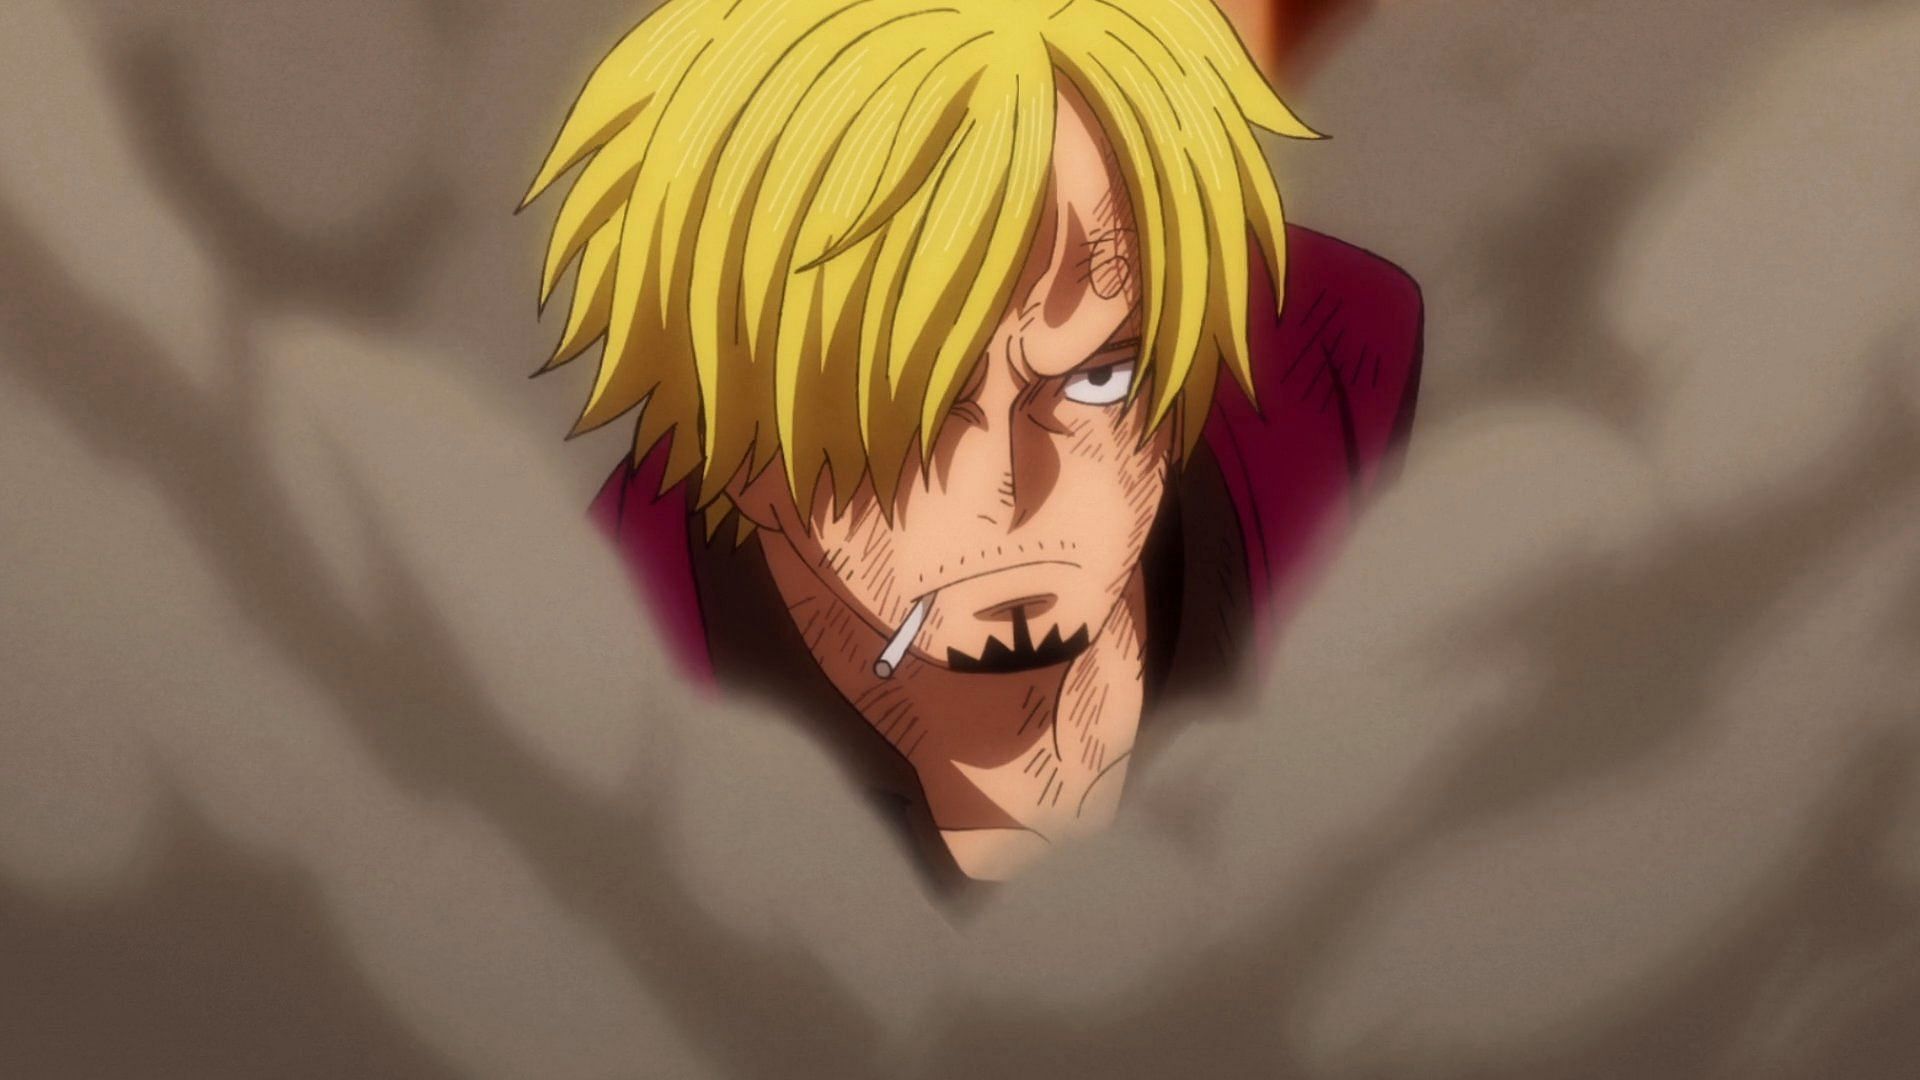 Sanji's new power up made him much stronger than before (Image via Toei Animation, One Piece)